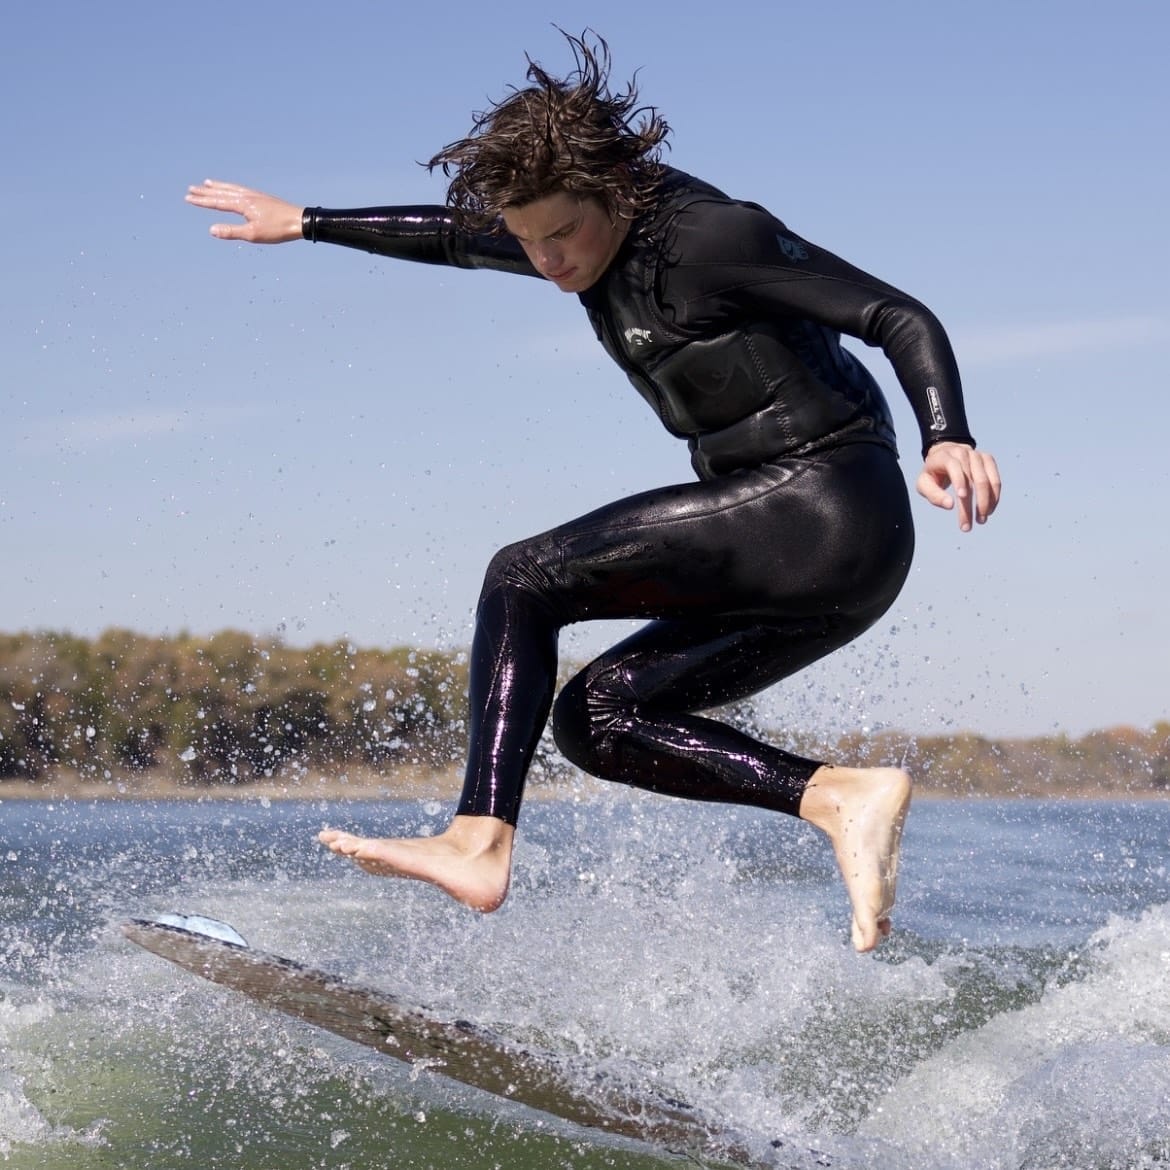 A man in a black wetsuit riding a surfboard.